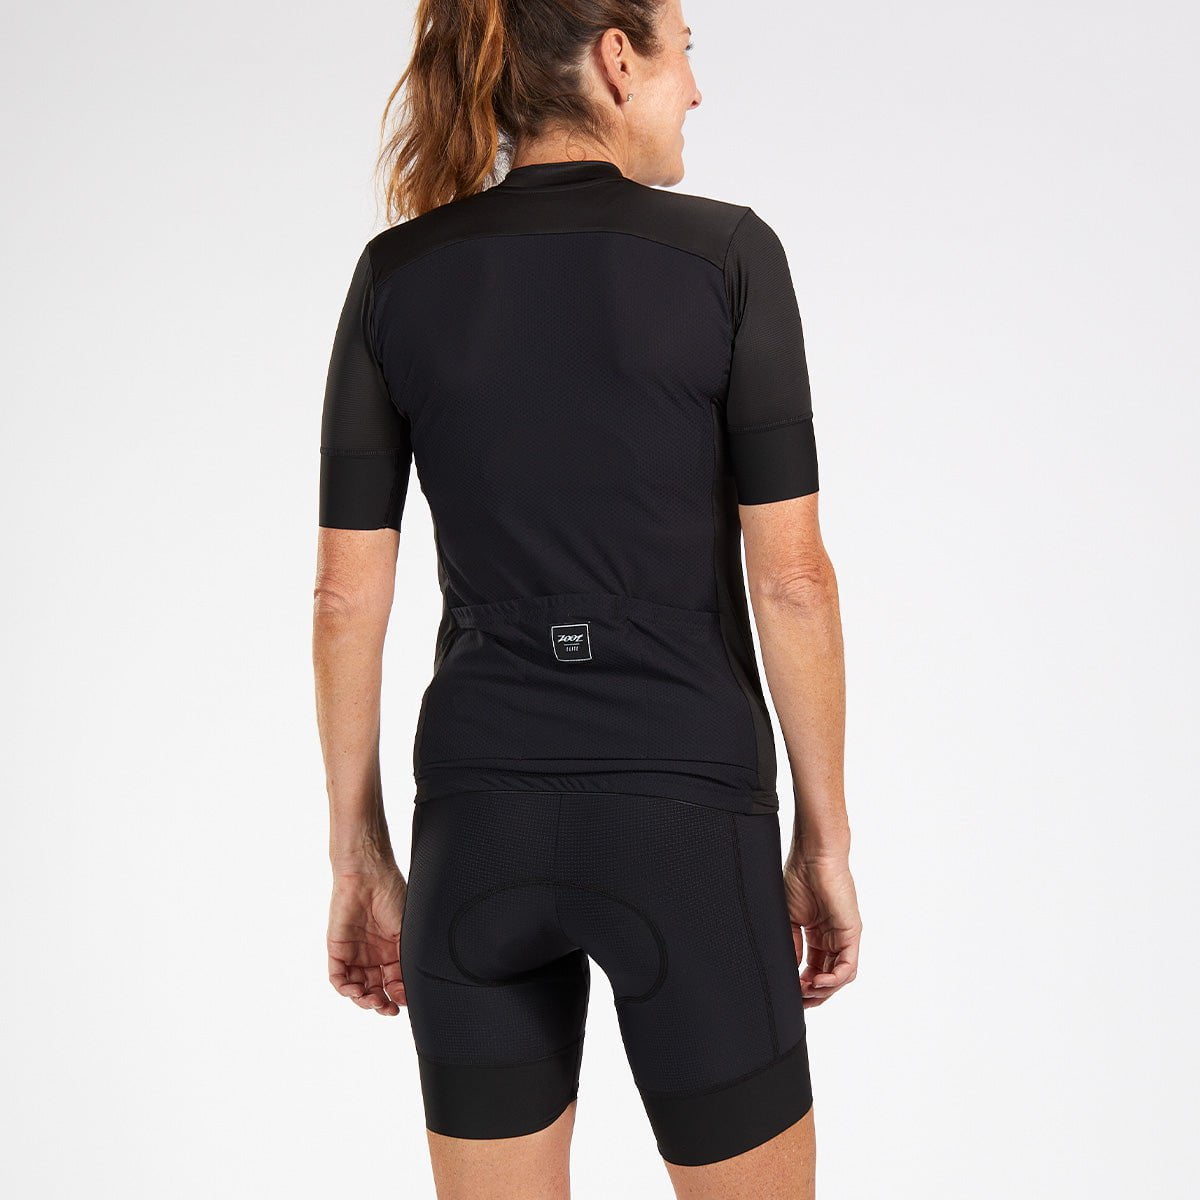 Zoot Sports CYCLE BOTTOMS WOMENS ELITE CYCLE HIGH WAIST SHORT - ELITE